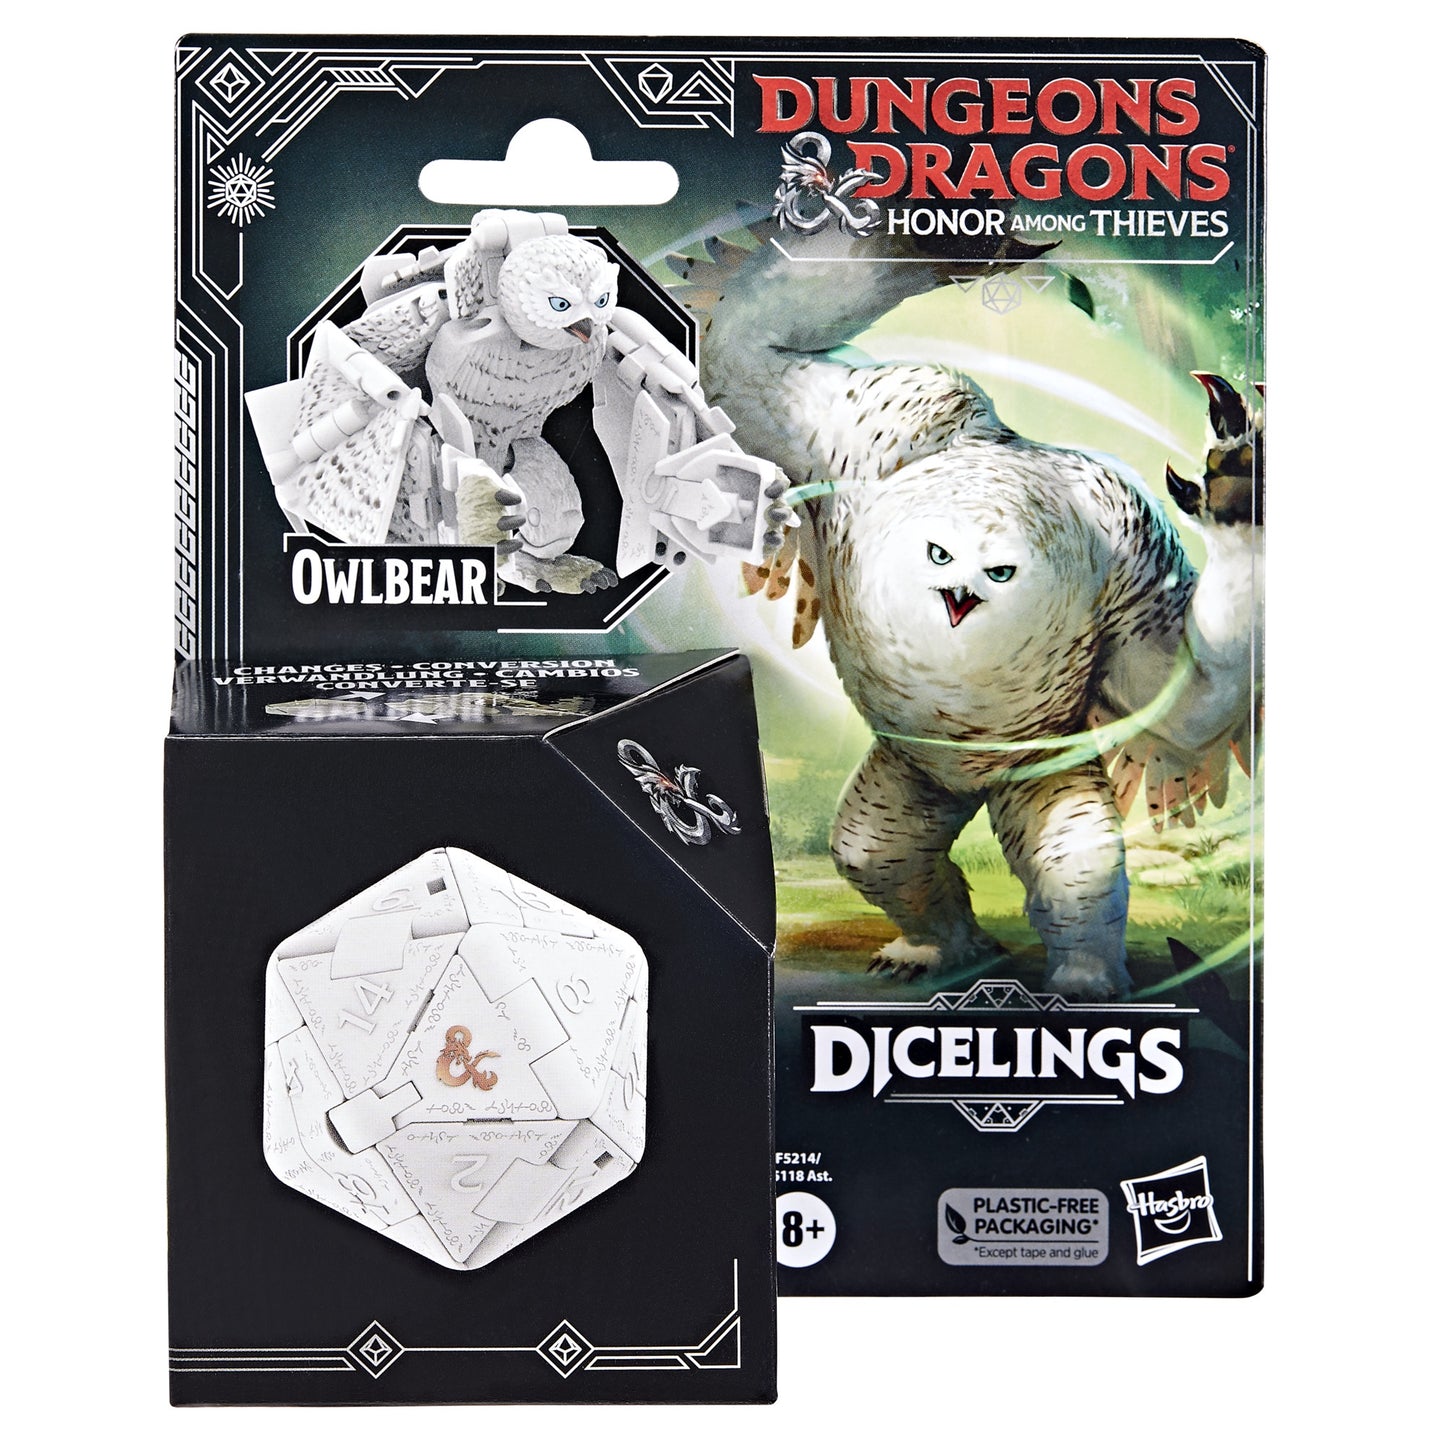 Dungeon & Dragons Honor Among Thieves Dicelings Owlbear White